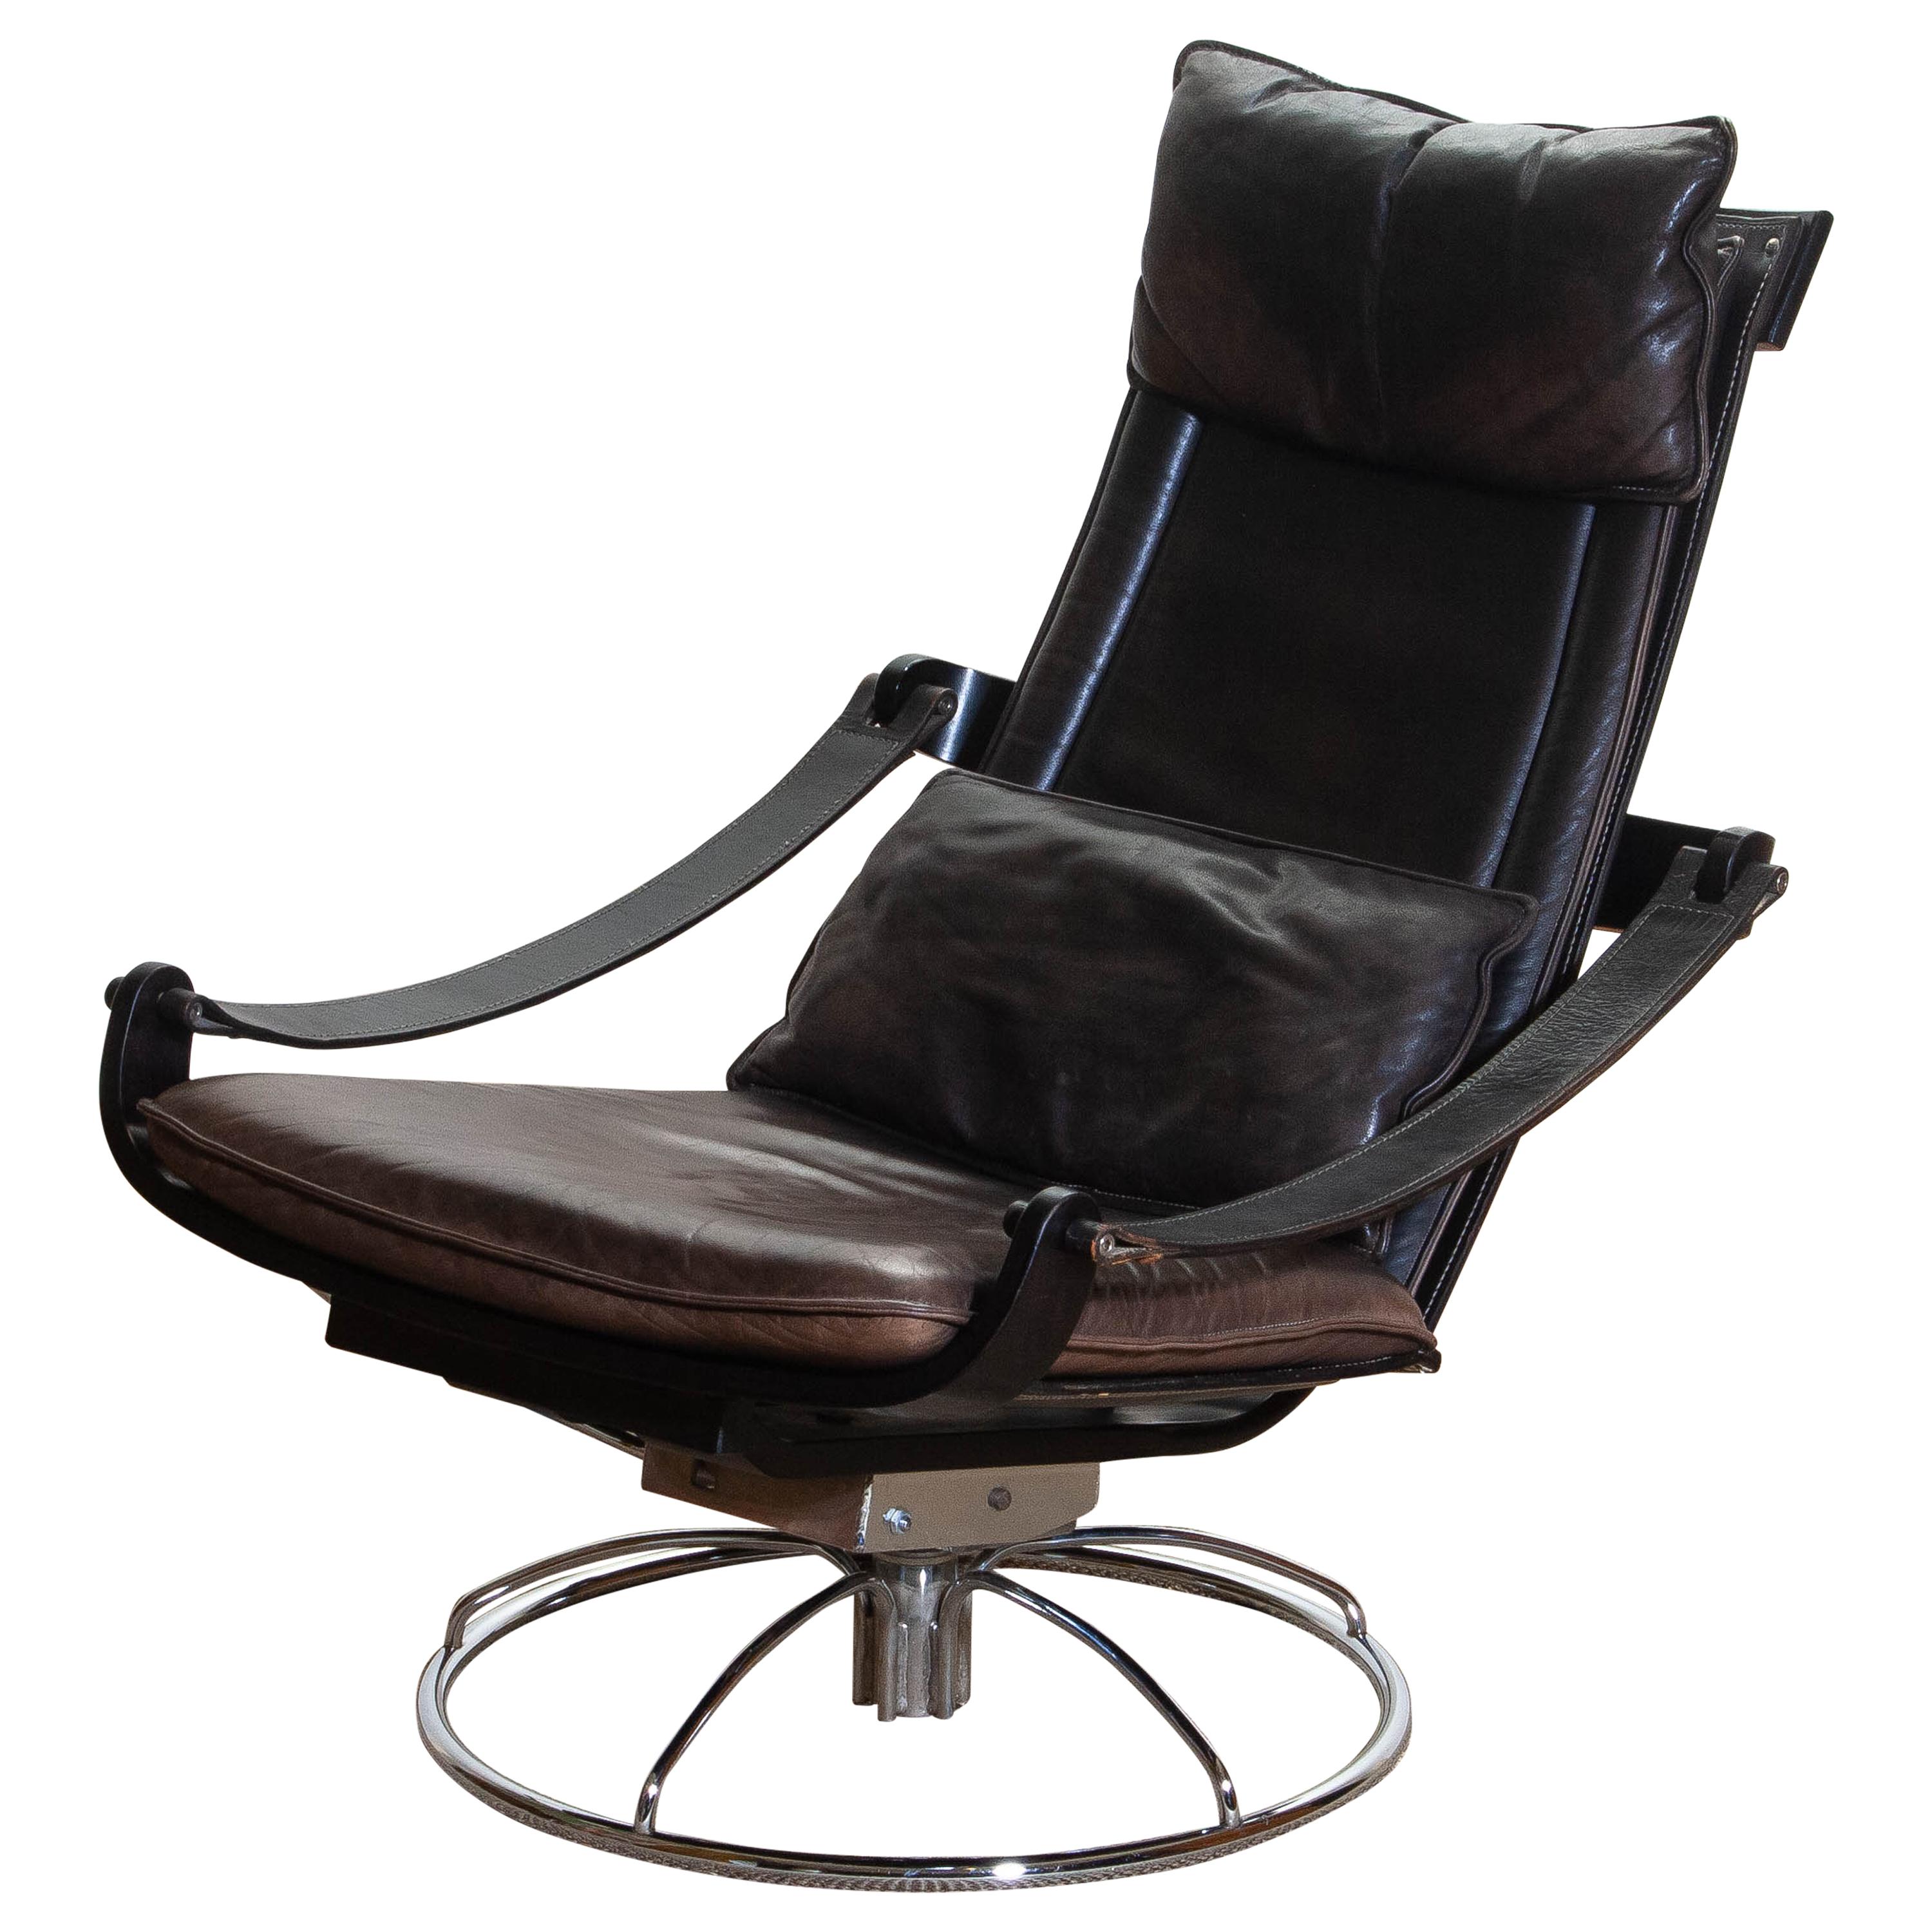 1970s Artistic Leather Swivel or Relax Chair by Ake Fribytter for Nelo, Sweden 9